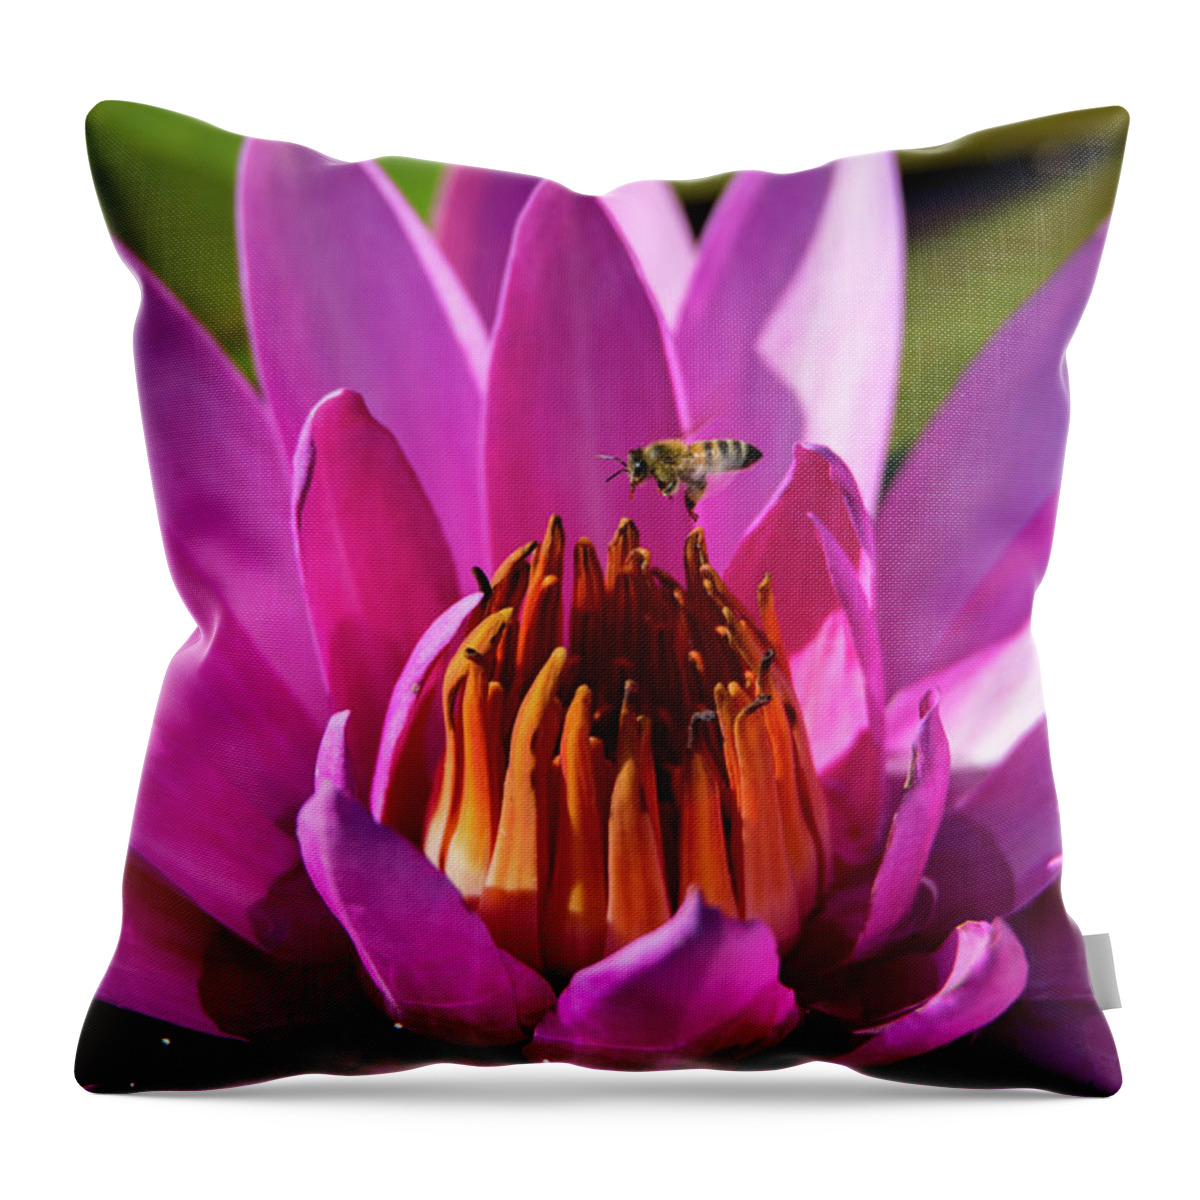 Bee Throw Pillow featuring the photograph Bee Hovering Over Pink Water Lily by Artful Imagery